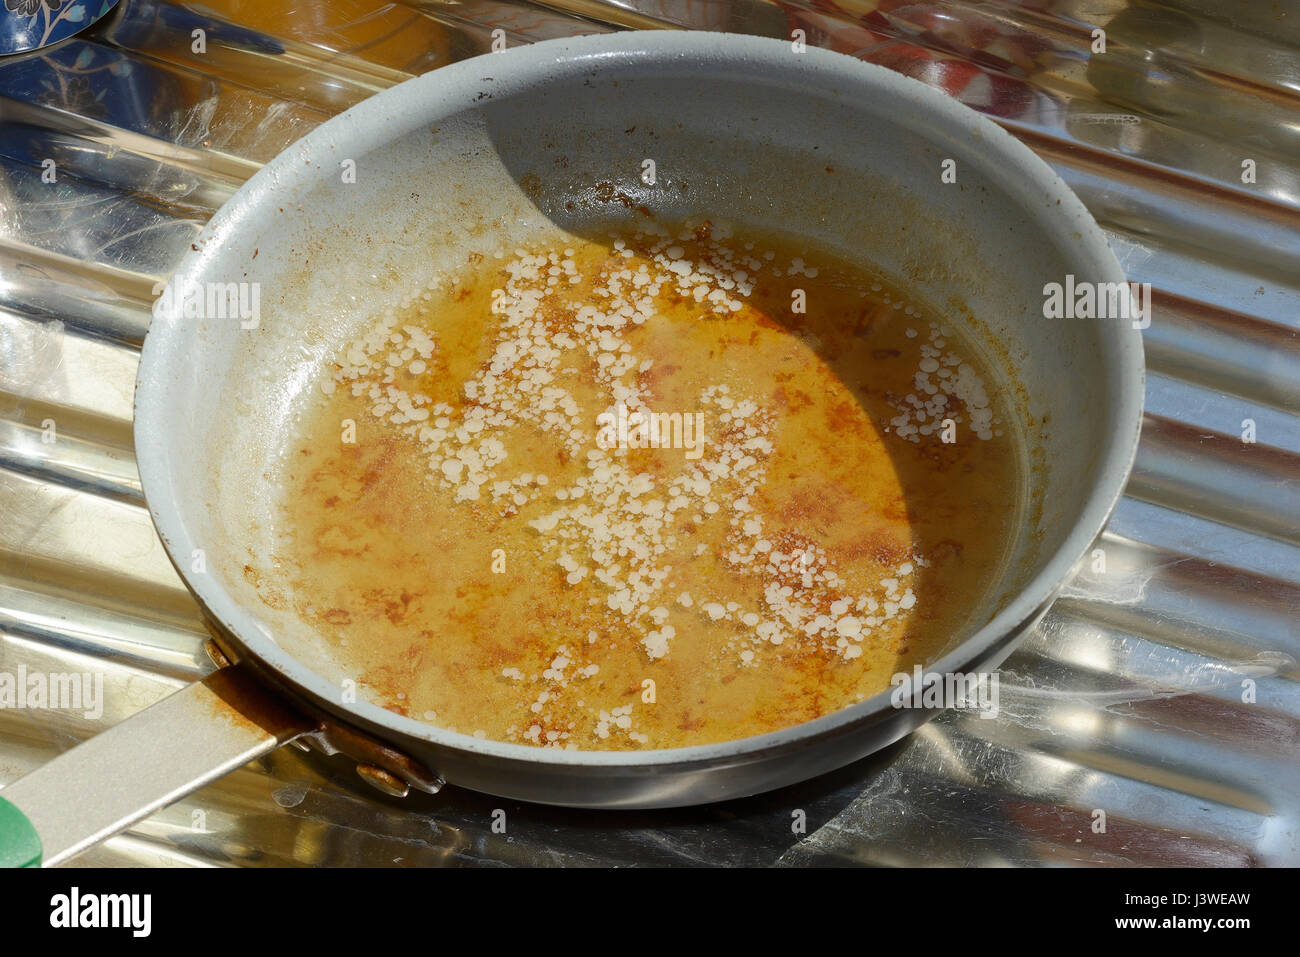 Oil fat and water in a frying pan Stock Photo